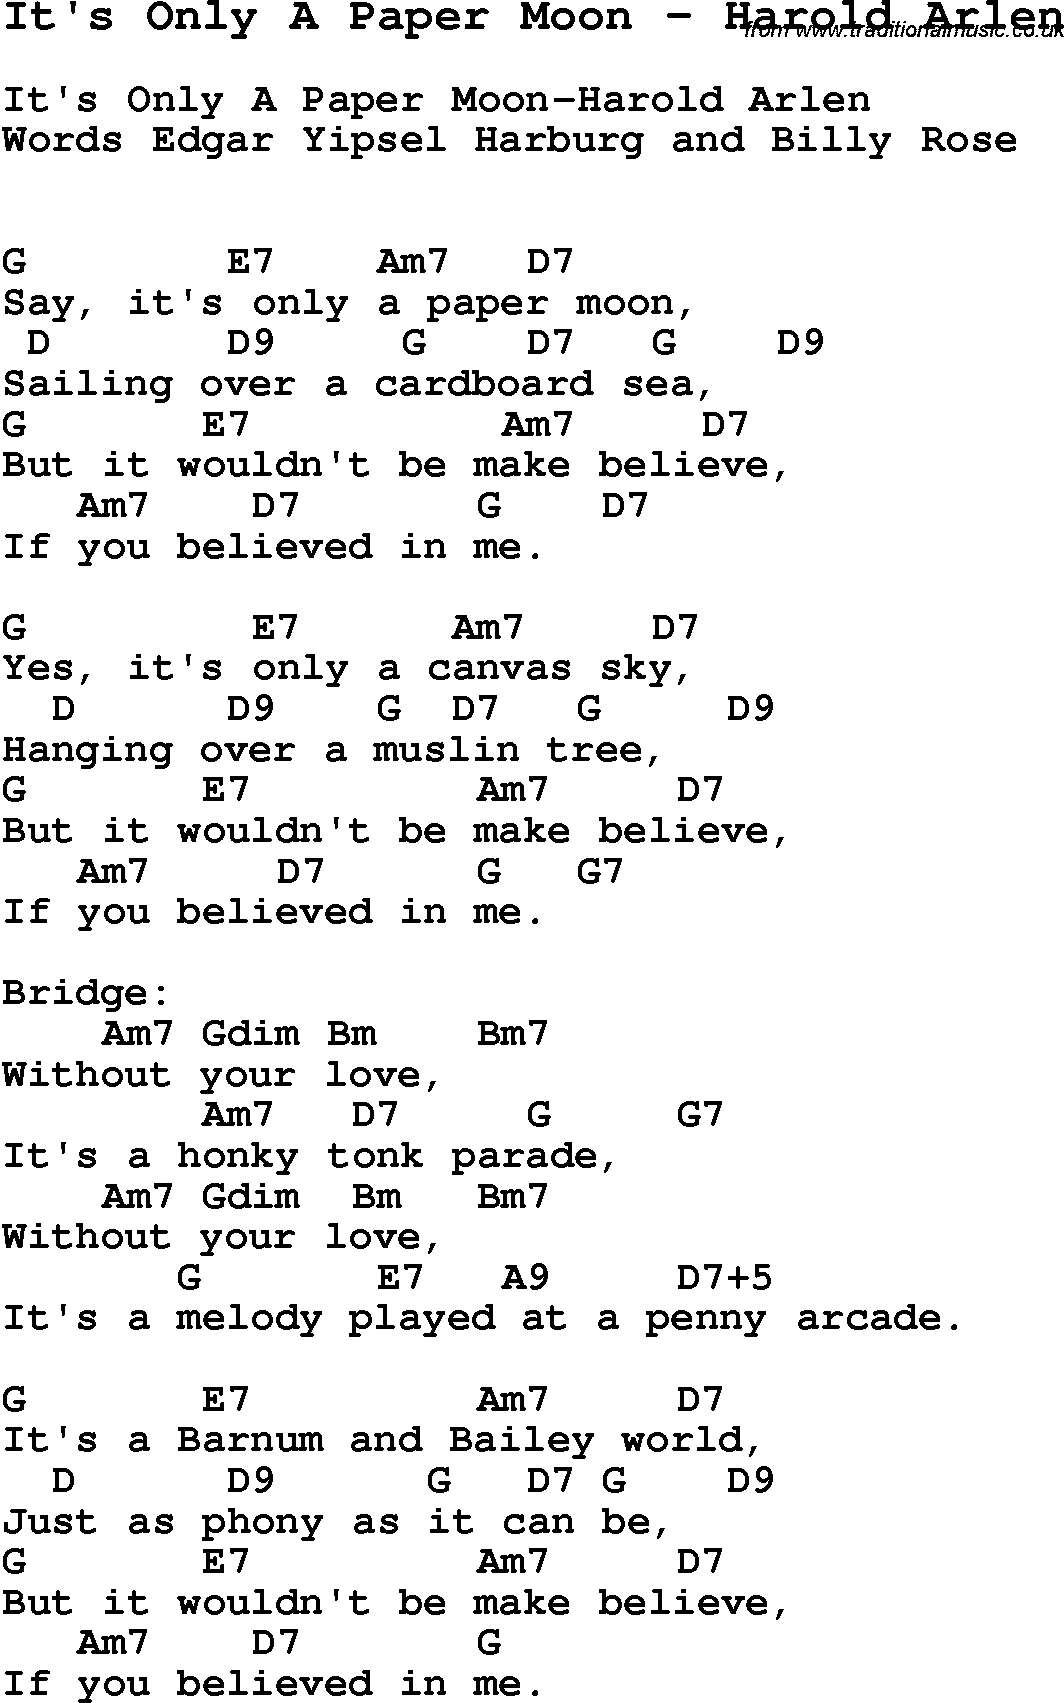 Song It's Only A Paper Moon by Harold Arlen, with lyrics for vocal performance and accompaniment chords for Ukulele, Guitar Banjo etc.